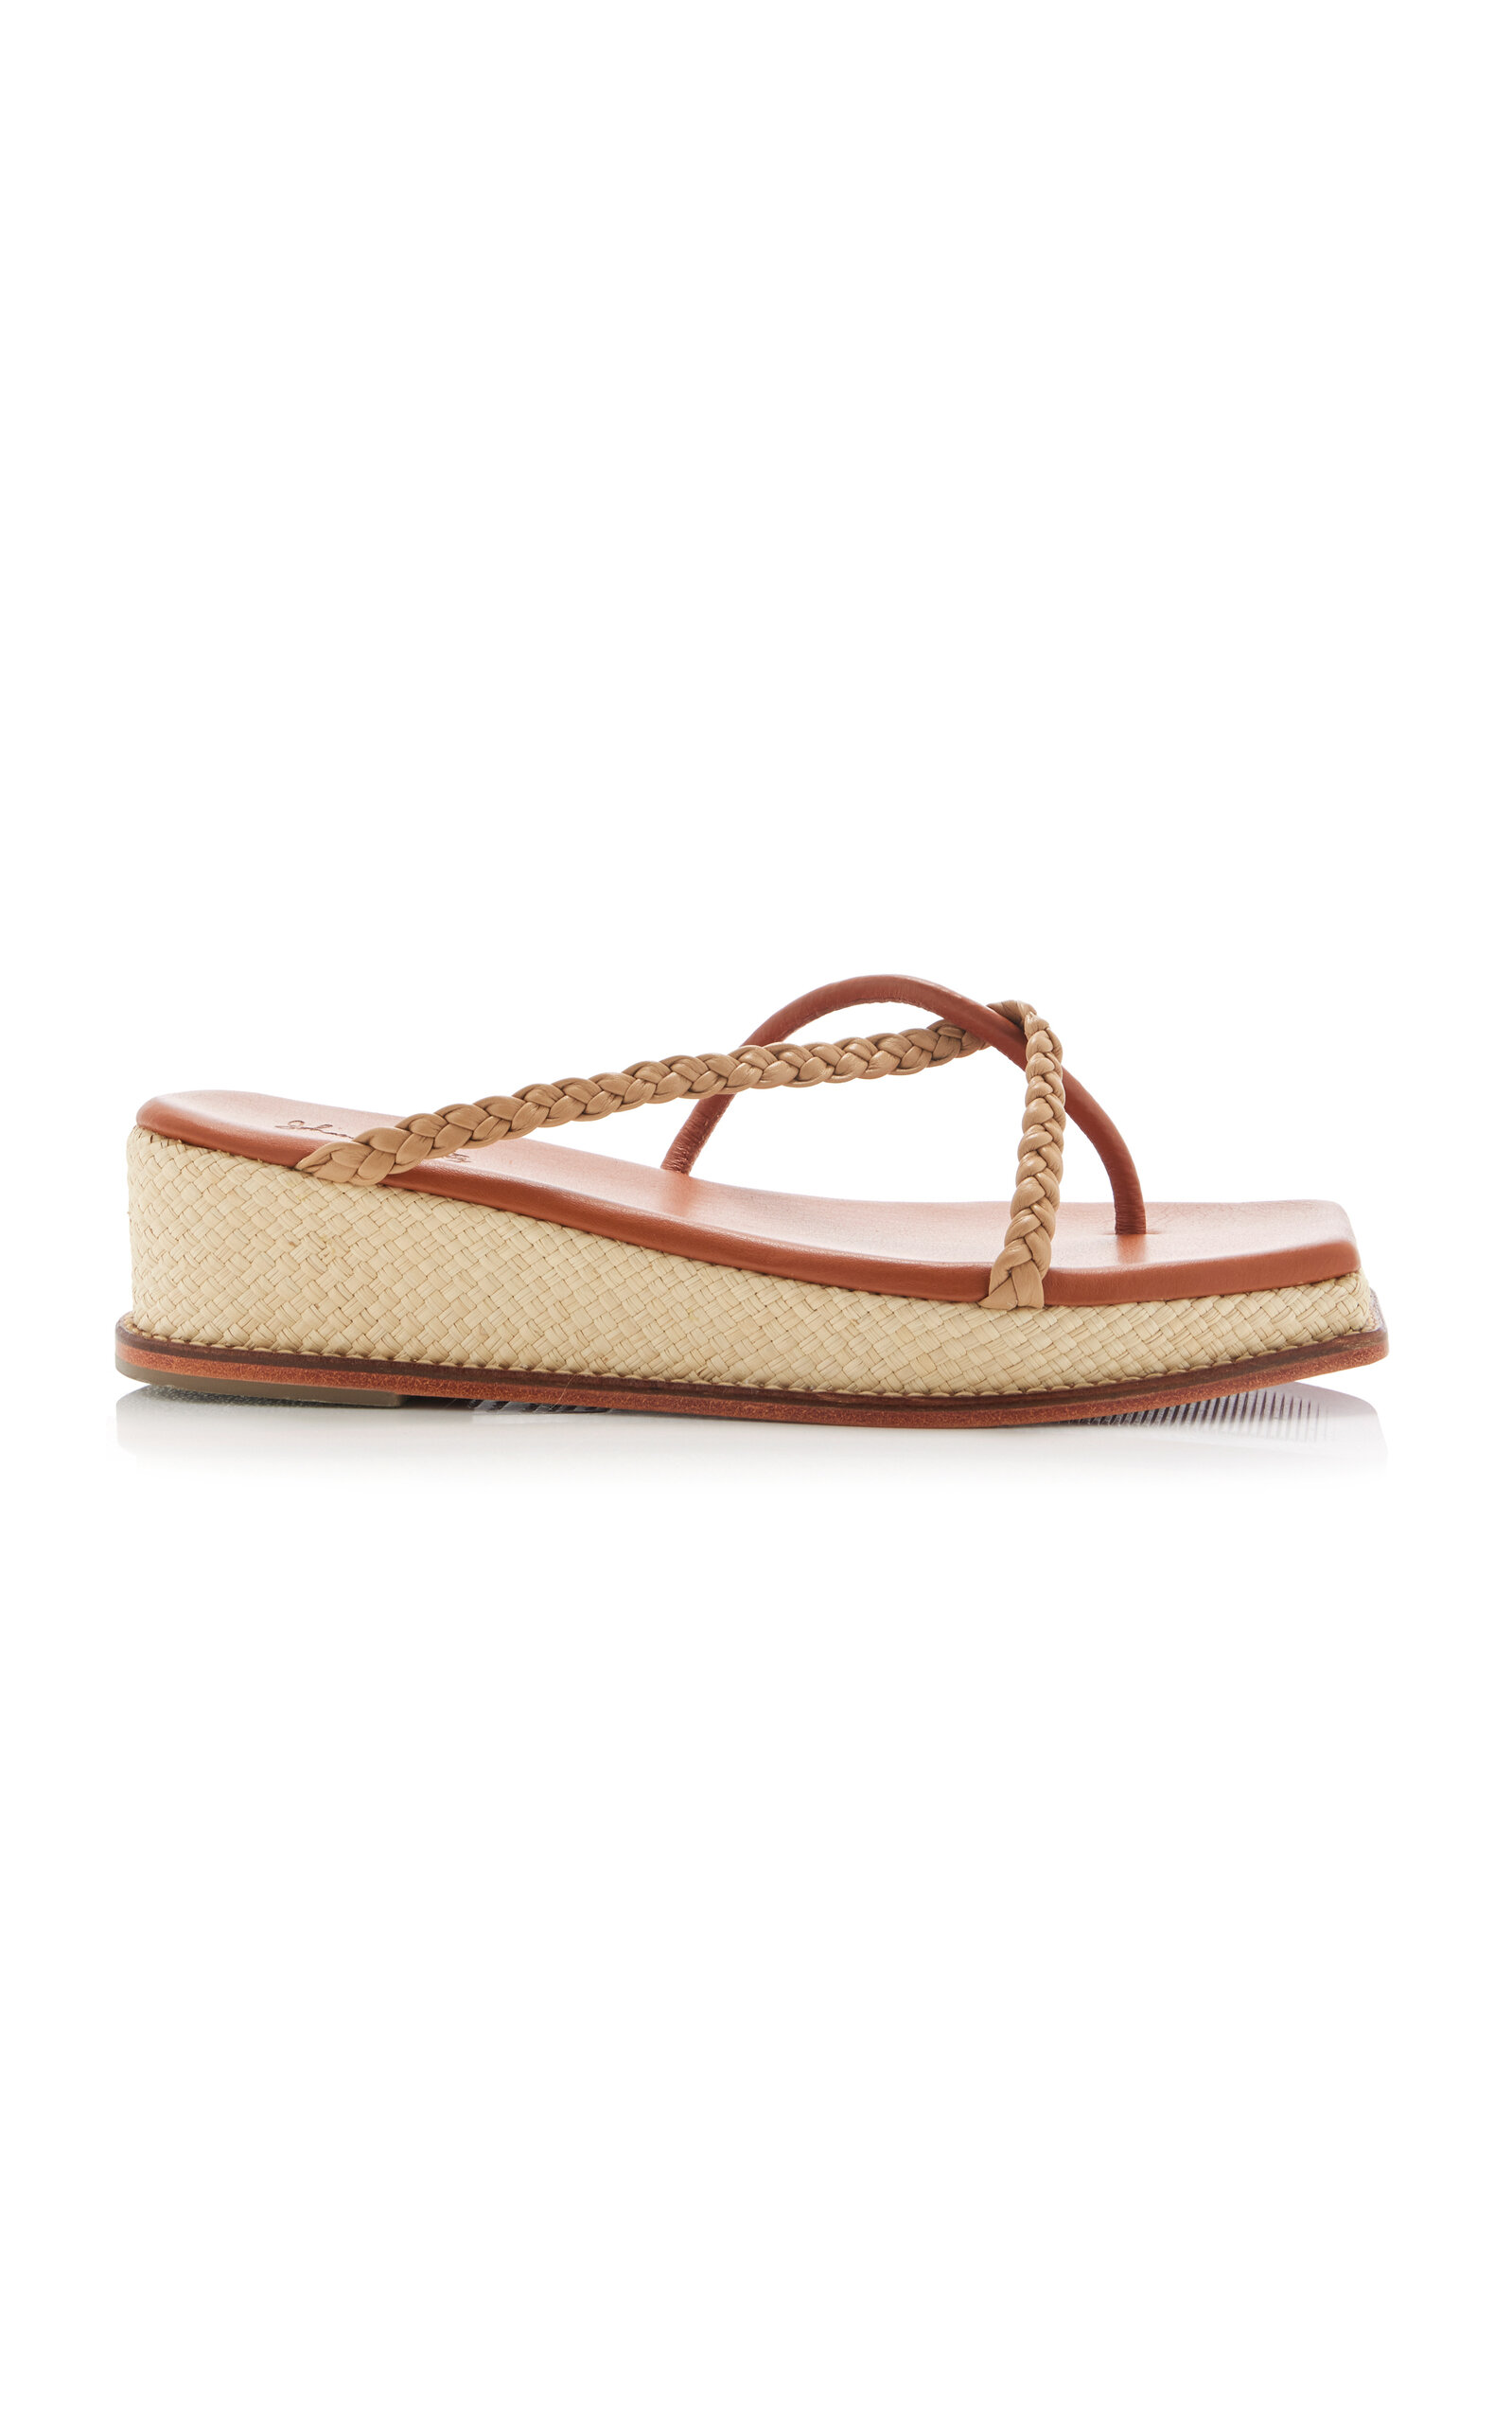 Earthly Heaven Palm; Leather Wedge Sandals